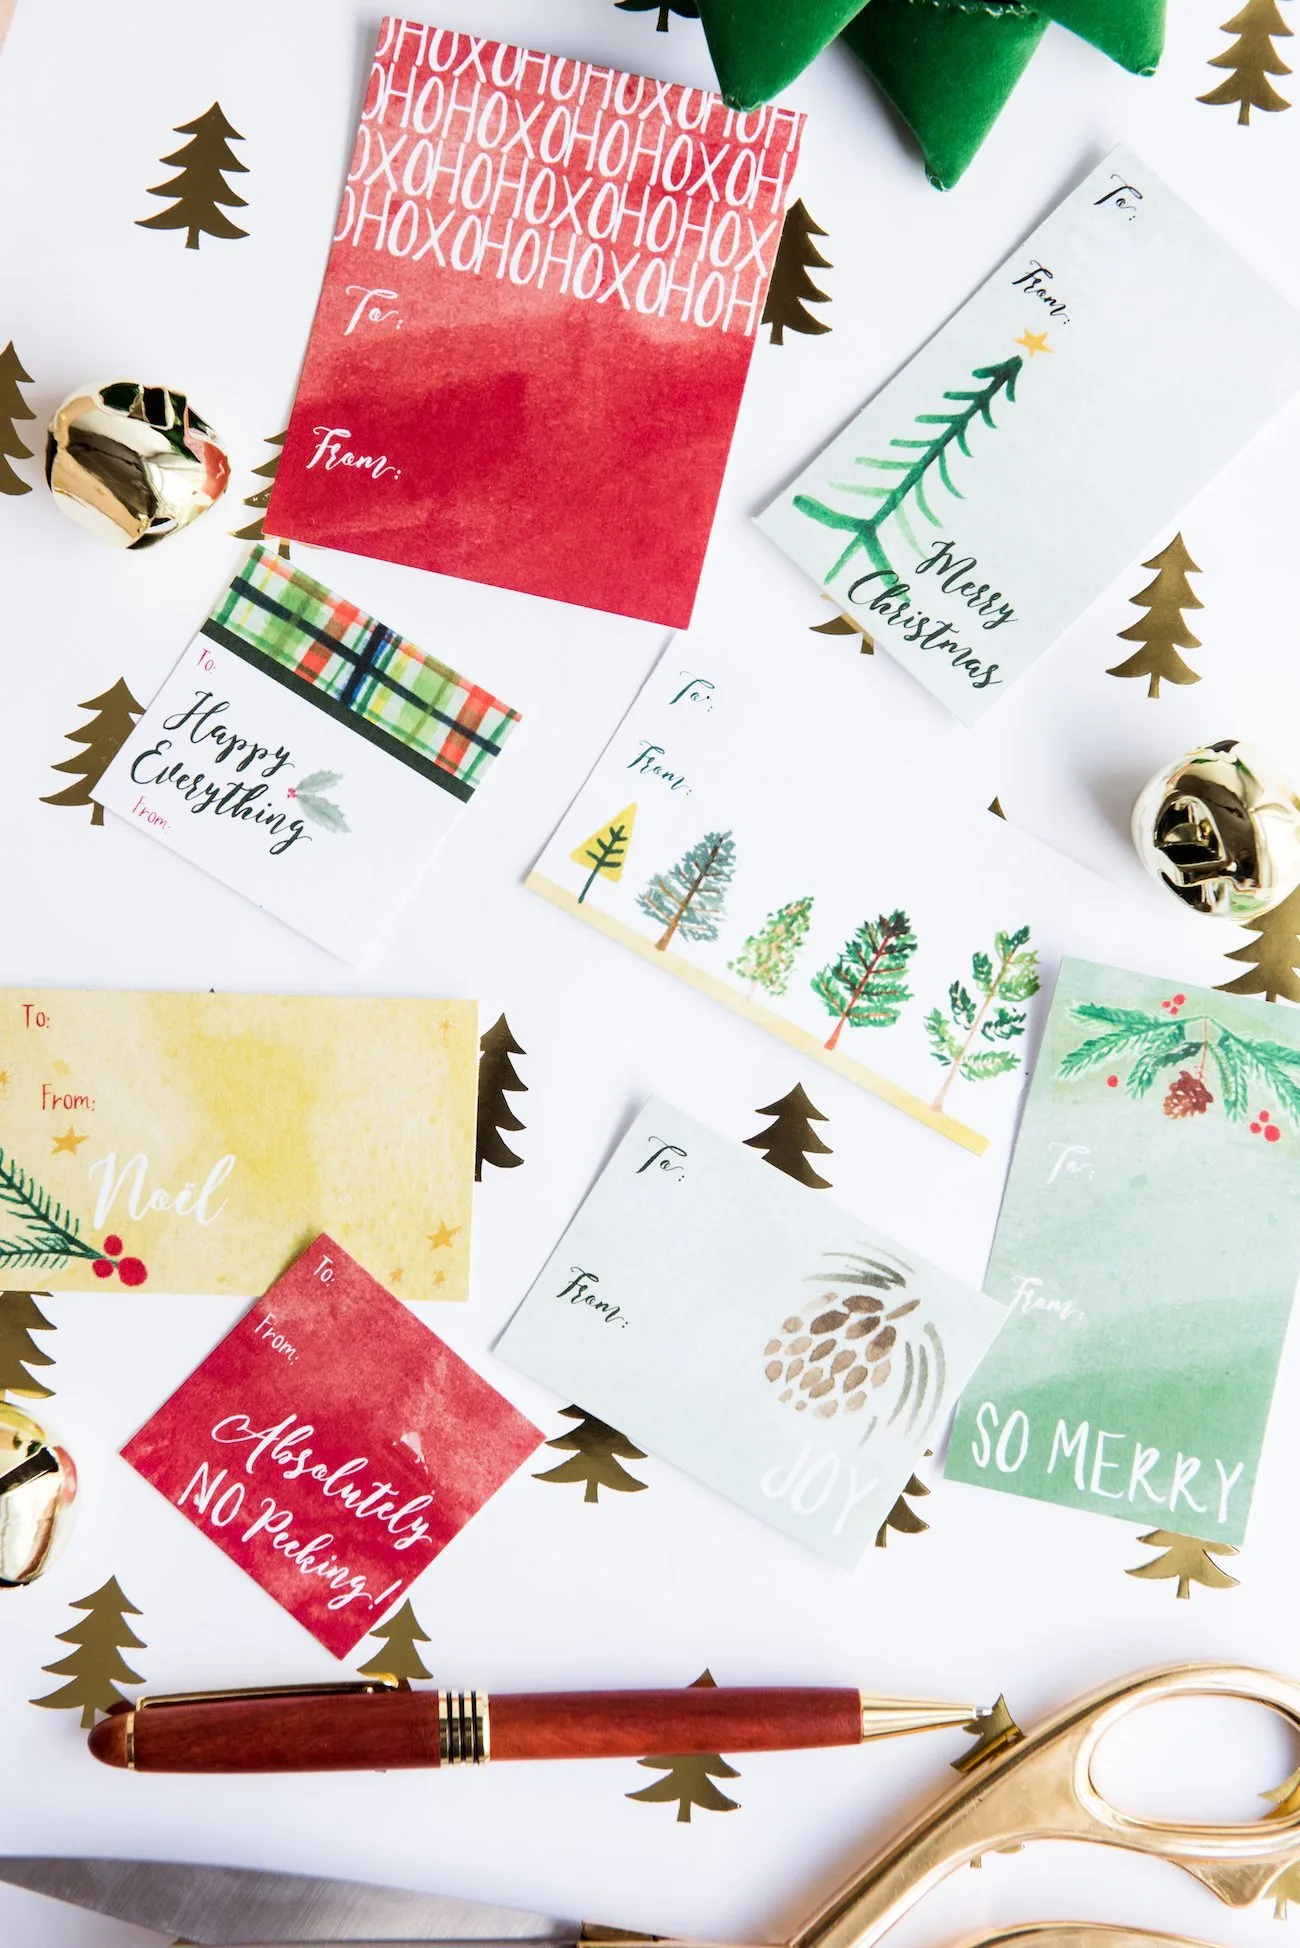 Pretty Printable Hand Painted Gift Tags | Christmas gift tags, holiday printables, free gift tags, entertaining ideas, holiday party ideas and more from @cydconverse